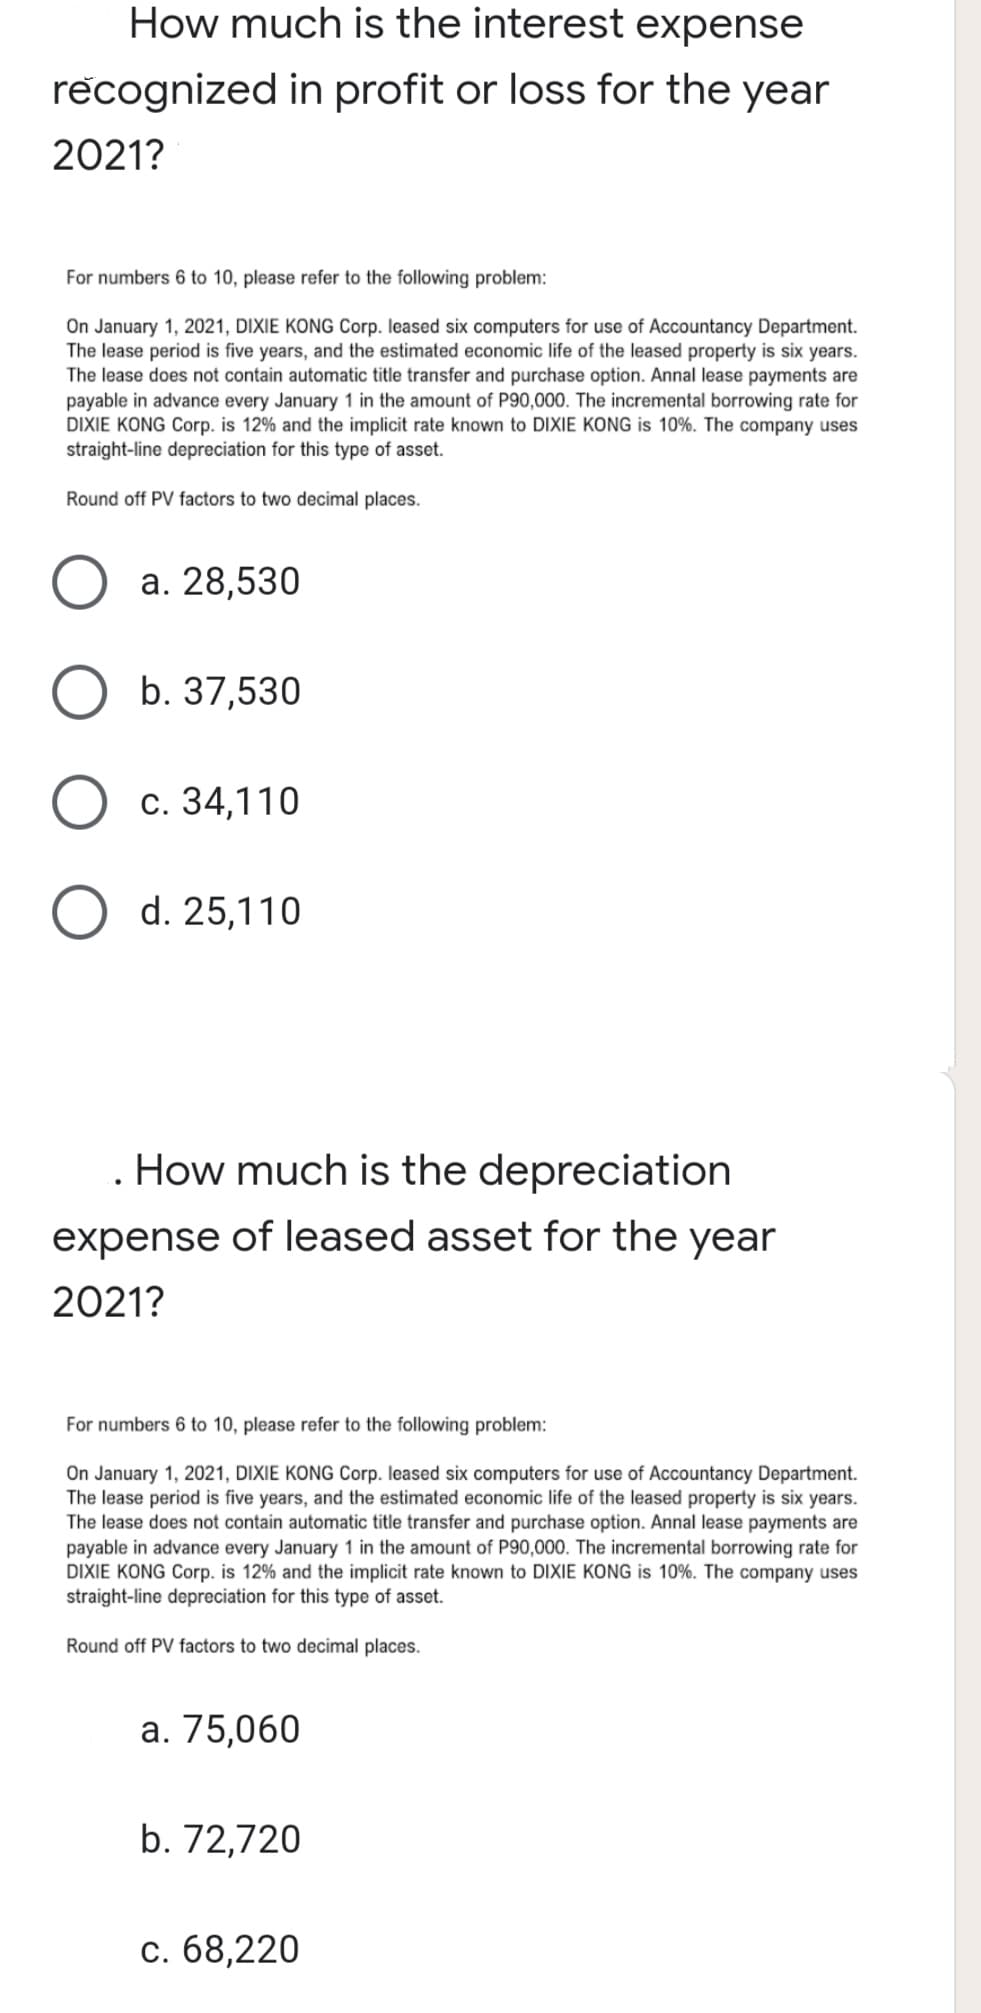 How much is the interest expense
recognized in profit or loss for the year
2021?
For numbers 6 to 10, please refer to the following problem:
On January 1, 2021, DIXIE KONG Corp. leased six computers for use of Accountancy Department.
The lease period is five years, and the estimated economic life of the leased property is six years.
The lease does not contain automatic title transfer and purchase option. Annal lease payments are
payable in advance every January 1 in the amount of P90,000. The incremental borrowing rate for
DIXIE KONG Corp. is 12% and the implicit rate known to DIXIE KONG is 10%. The company uses
straight-line depreciation for this type of asset.
Round off PV factors to two decimal places.
а. 28,530
b. 37,530
c. 34,110
d. 25,110
. How much is the depreciation
expense of leased asset for the year
2021?
For numbers 6 to 10, please refer to the following problem:
On January 1, 2021, DIXIE KONG Corp. leased six computers for use of Accountancy Department.
The lease period is five years, and the estimated economic life of the leased property is six years.
The lease does not contain automatic title transfer and purchase option. Annal lease payments are
payable in advance every January 1 in the amount of P90,000. The incremental borrowing rate for
DIXIE KONG Corp. is 12% and the implicit rate known to DIXIE KONG is 10%. The company uses
straight-line depreciation for this type of asset.
Round off PV factors to two decimal places.
а. 75,060
b. 72,720
с. 68,220
